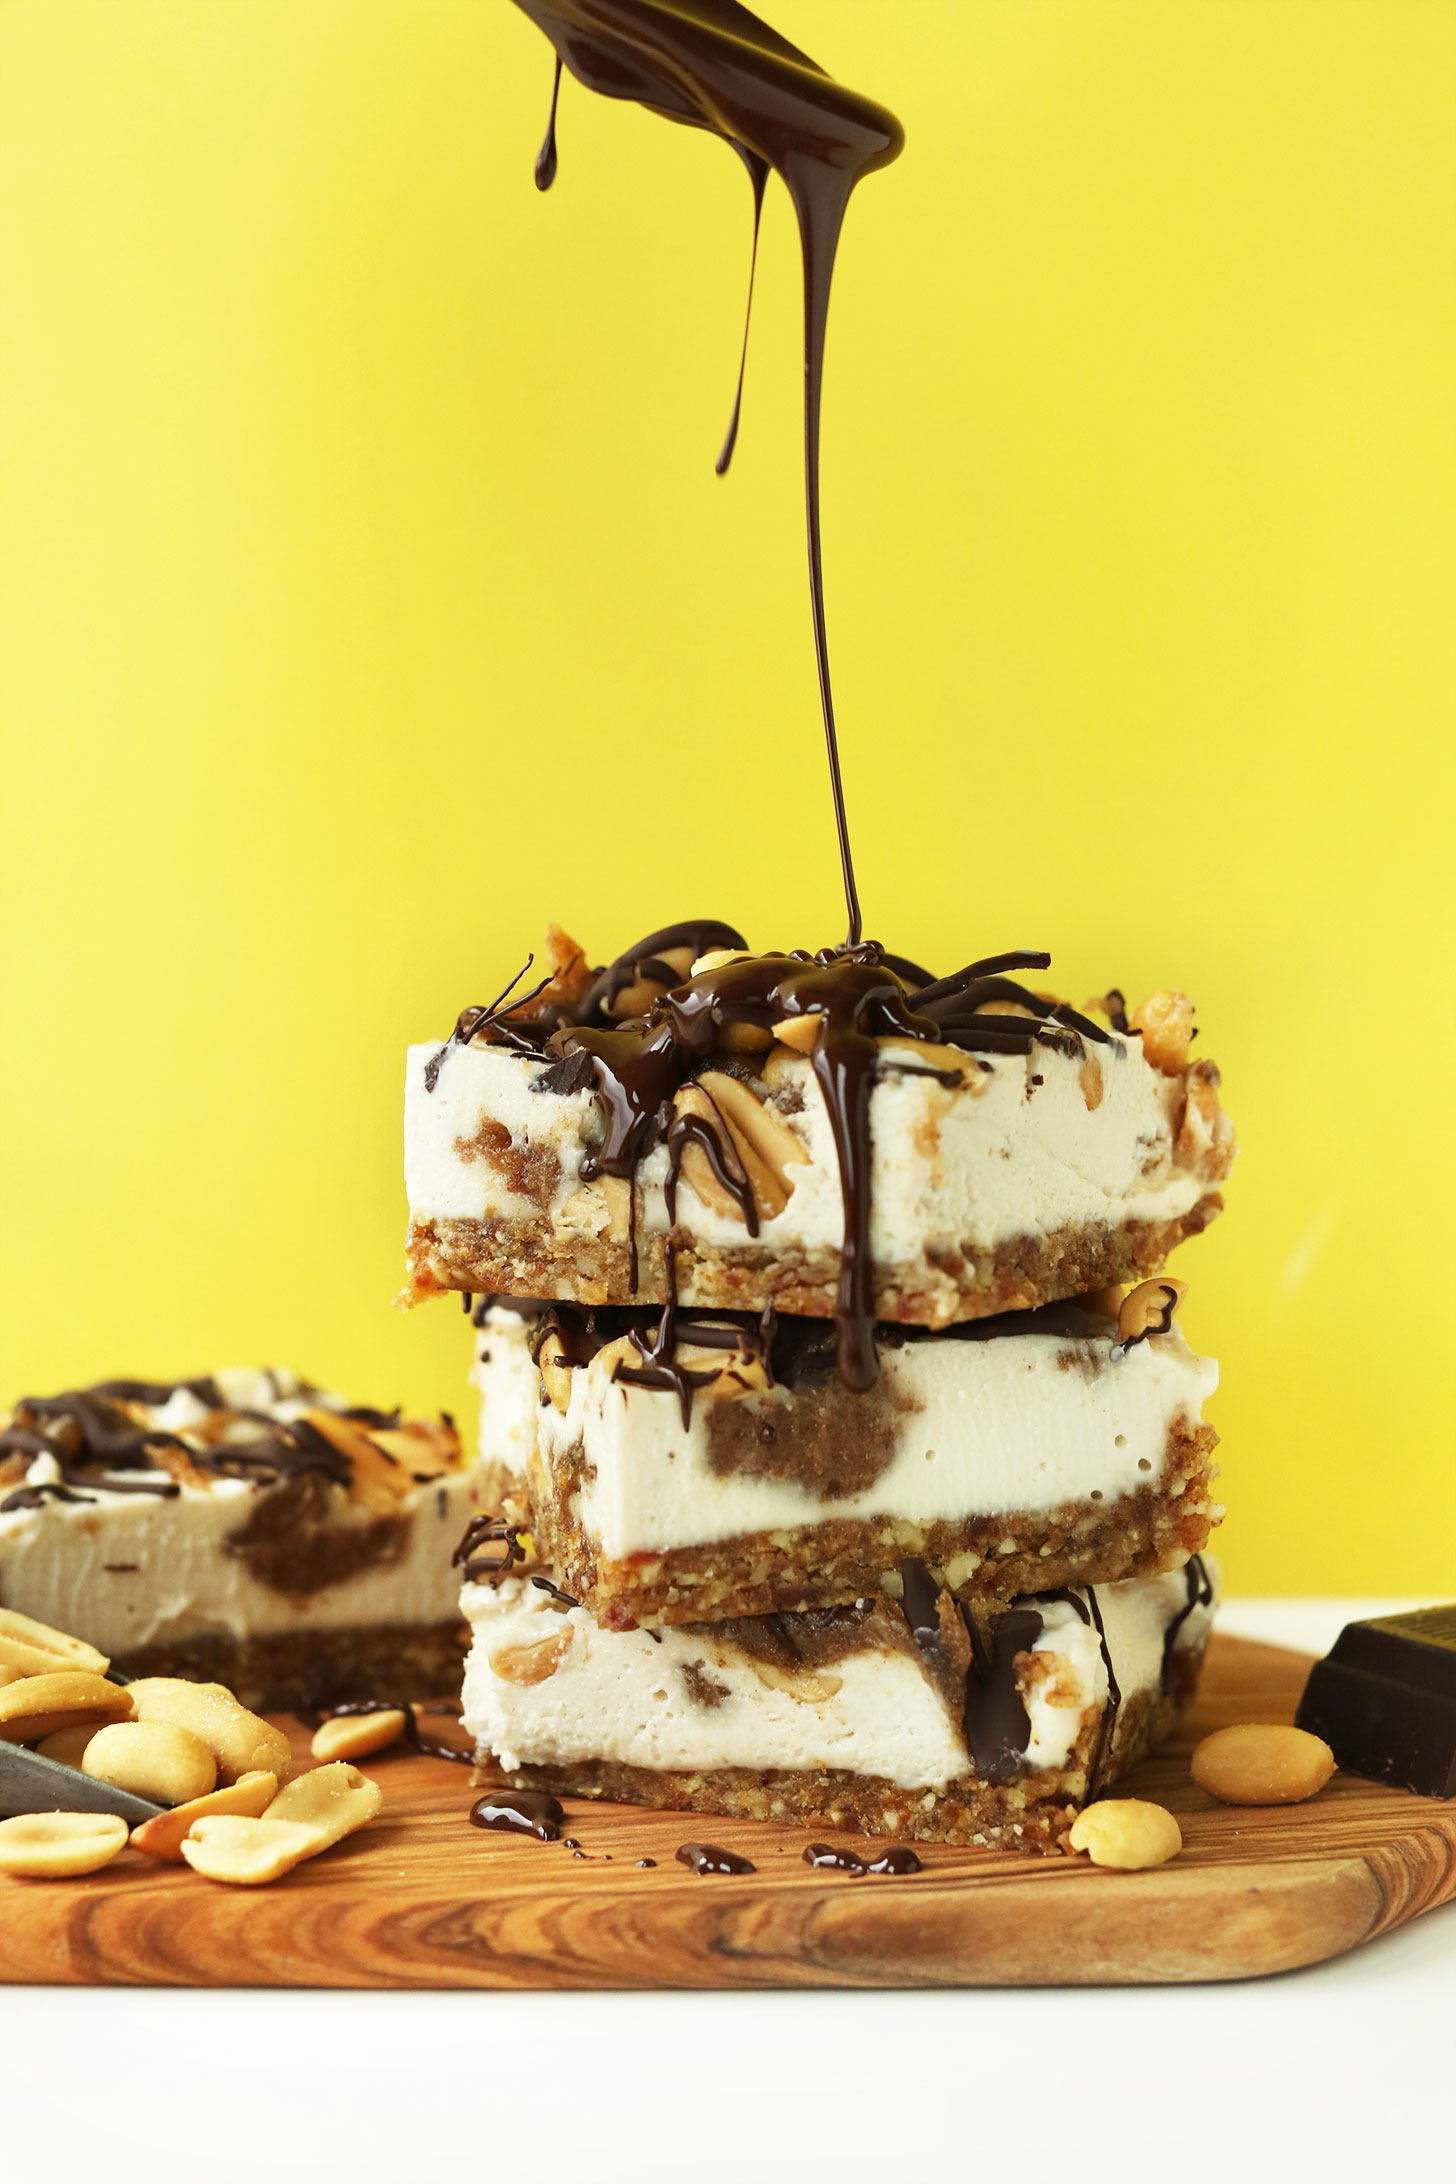 Drizzling chocolate sauce over squares of our vegan snickers cheesecake recipe